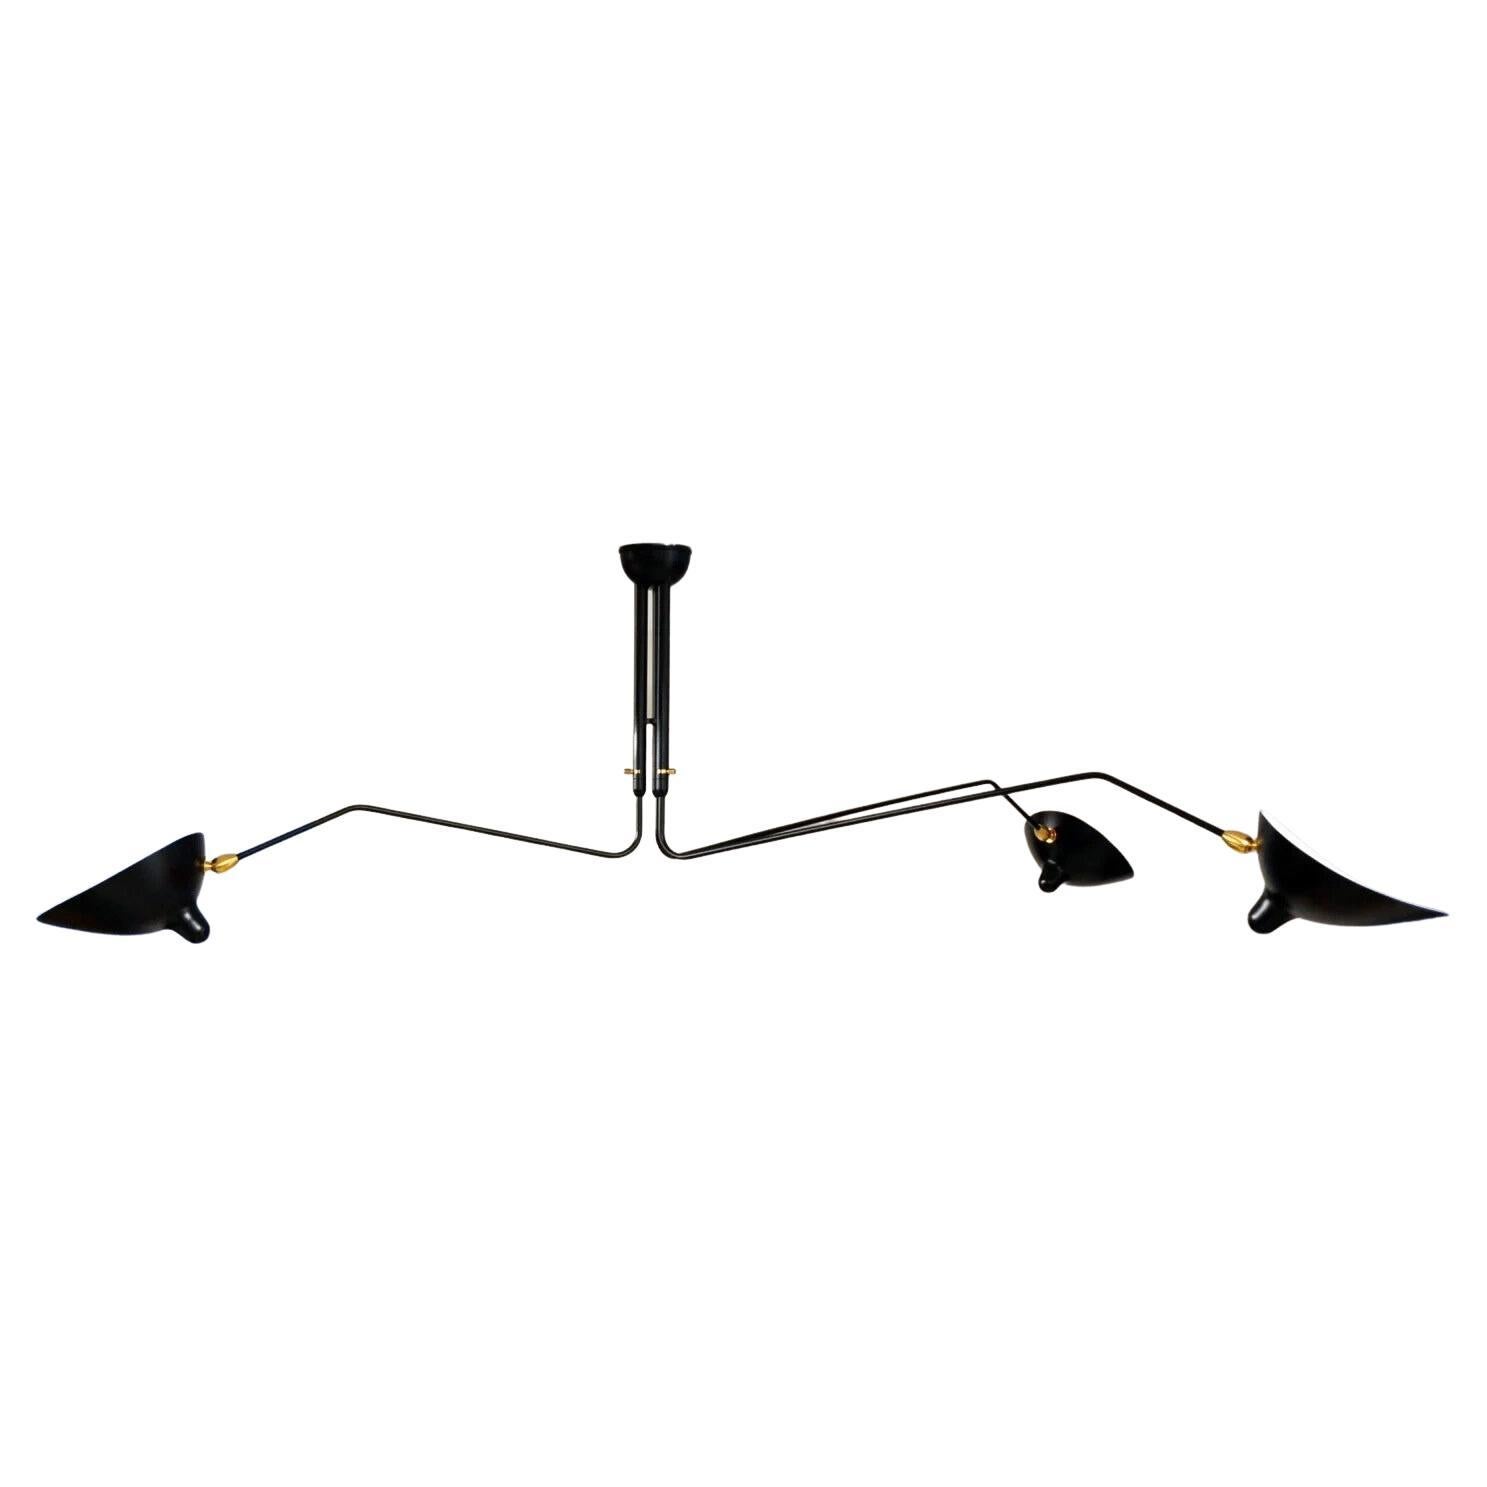 DESCRIPTION: 
Simple and elegant, this ceiling lamp makes a dramatic addition to a variety of room settings. With three rotating arms of differing lengths and heads that swivel and tilt, this lamp is capable of projecting light upwards, downwards.